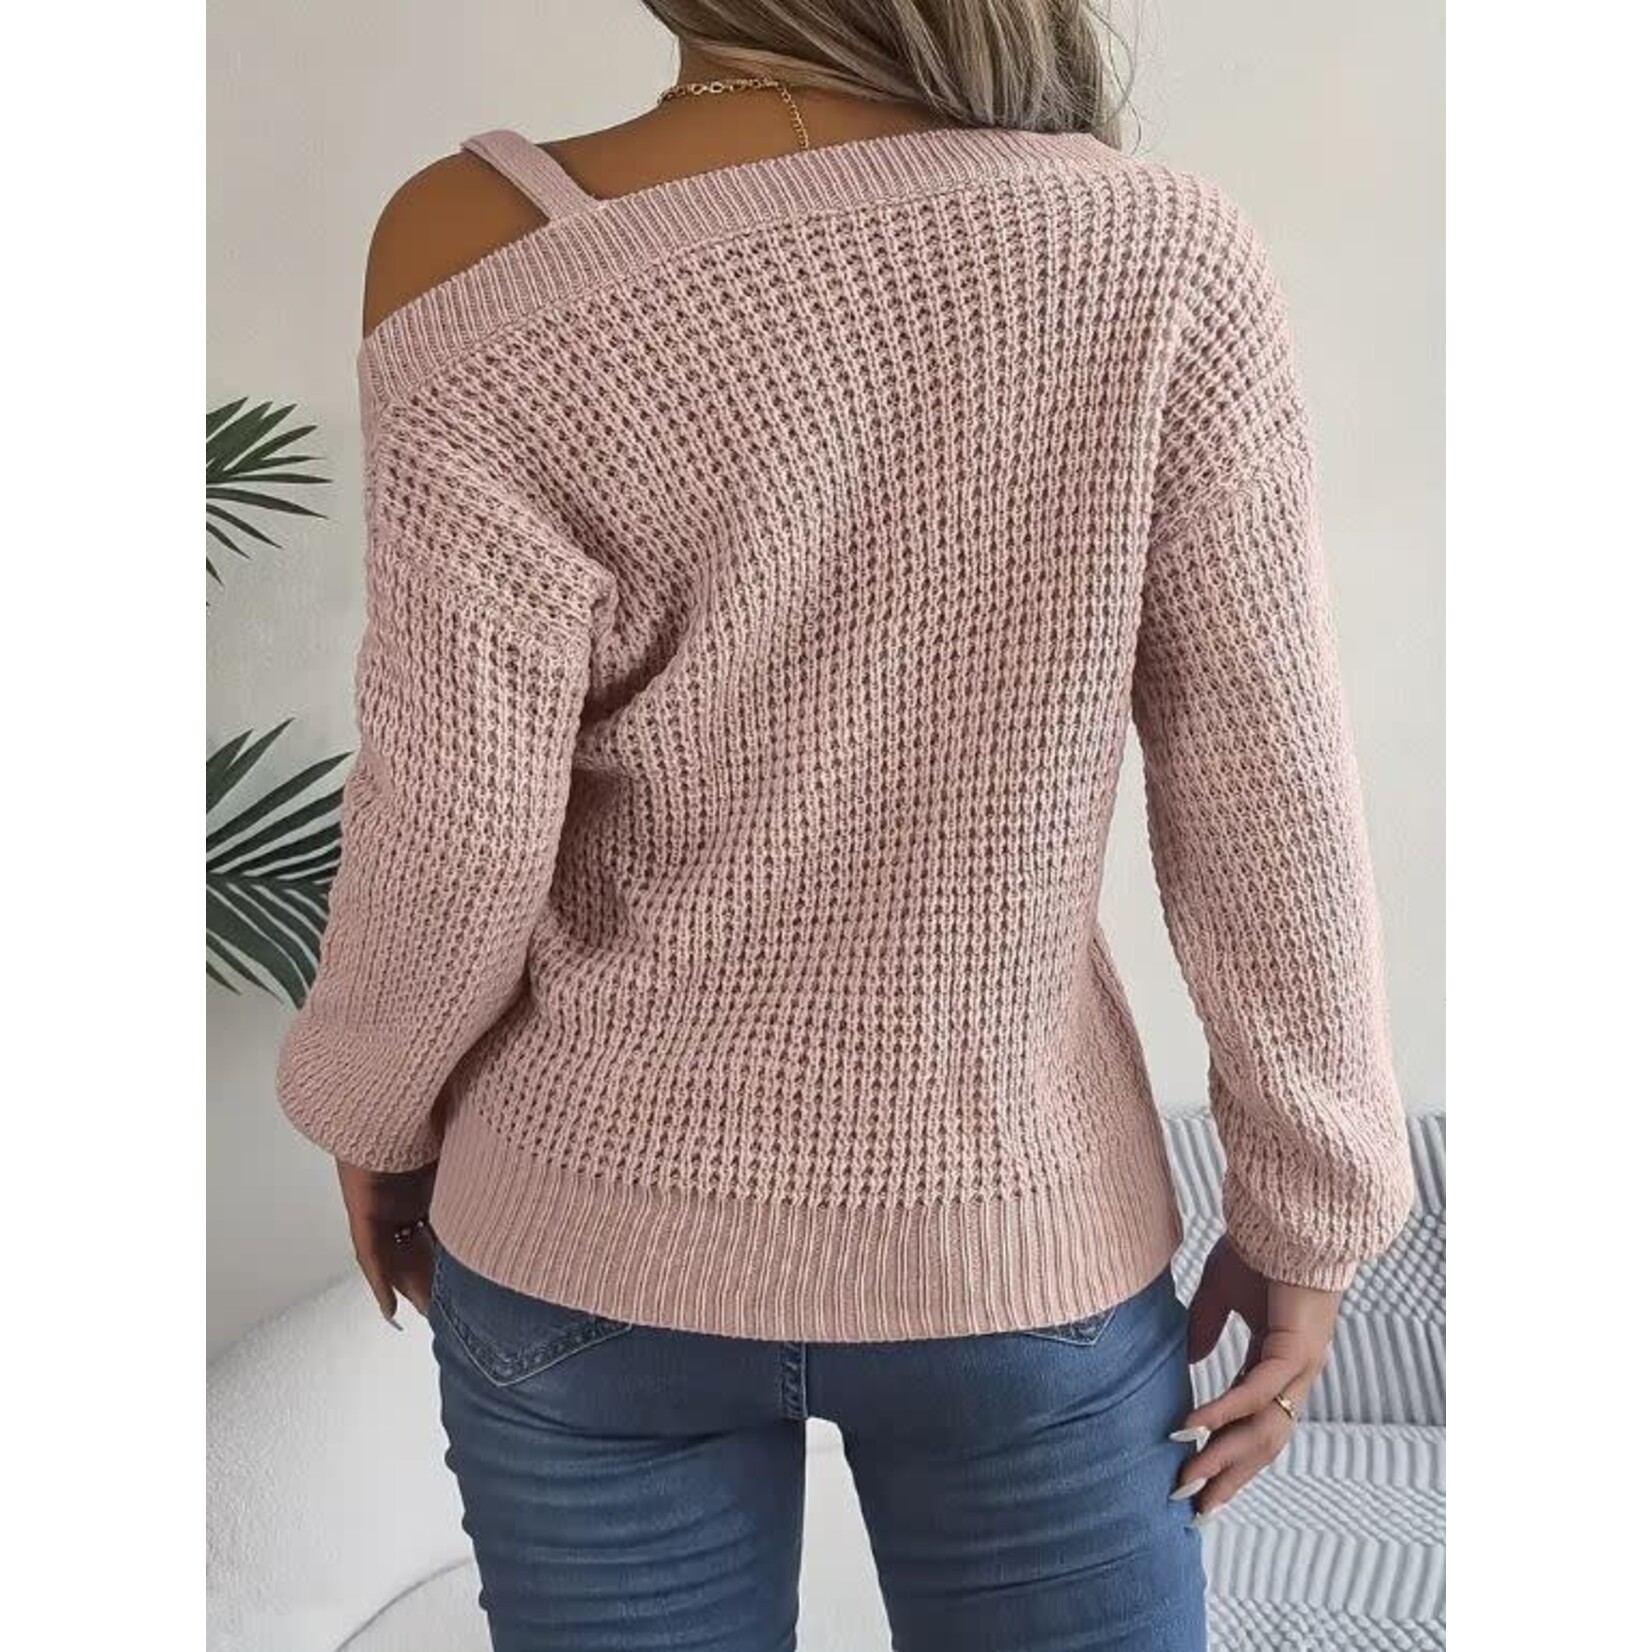 GGS Tami Cold Shoulder Sweater Baby Pink